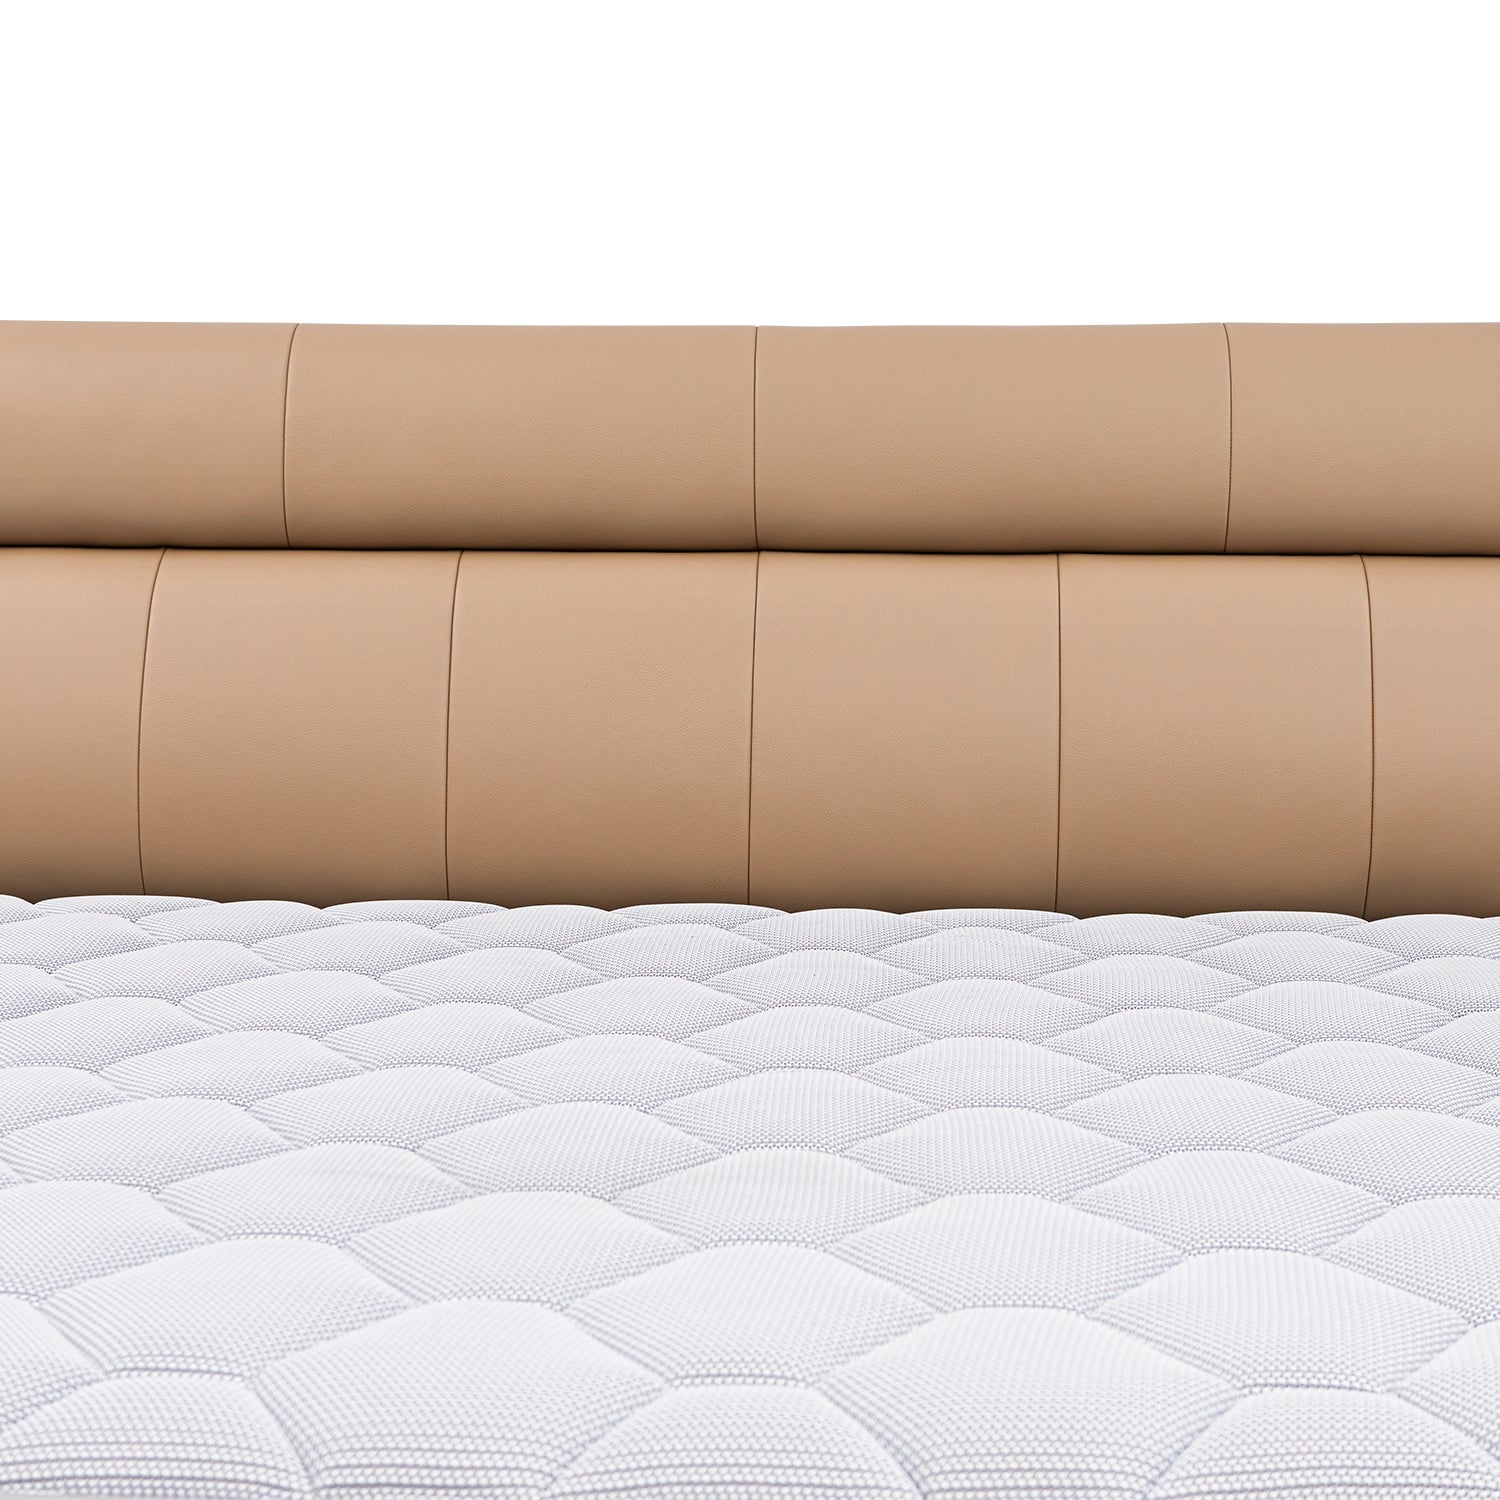 Close-up of DeRUCCI Bed Frame BOC1 - 011 showcasing a beige padded headboard and a white quilted mattress.